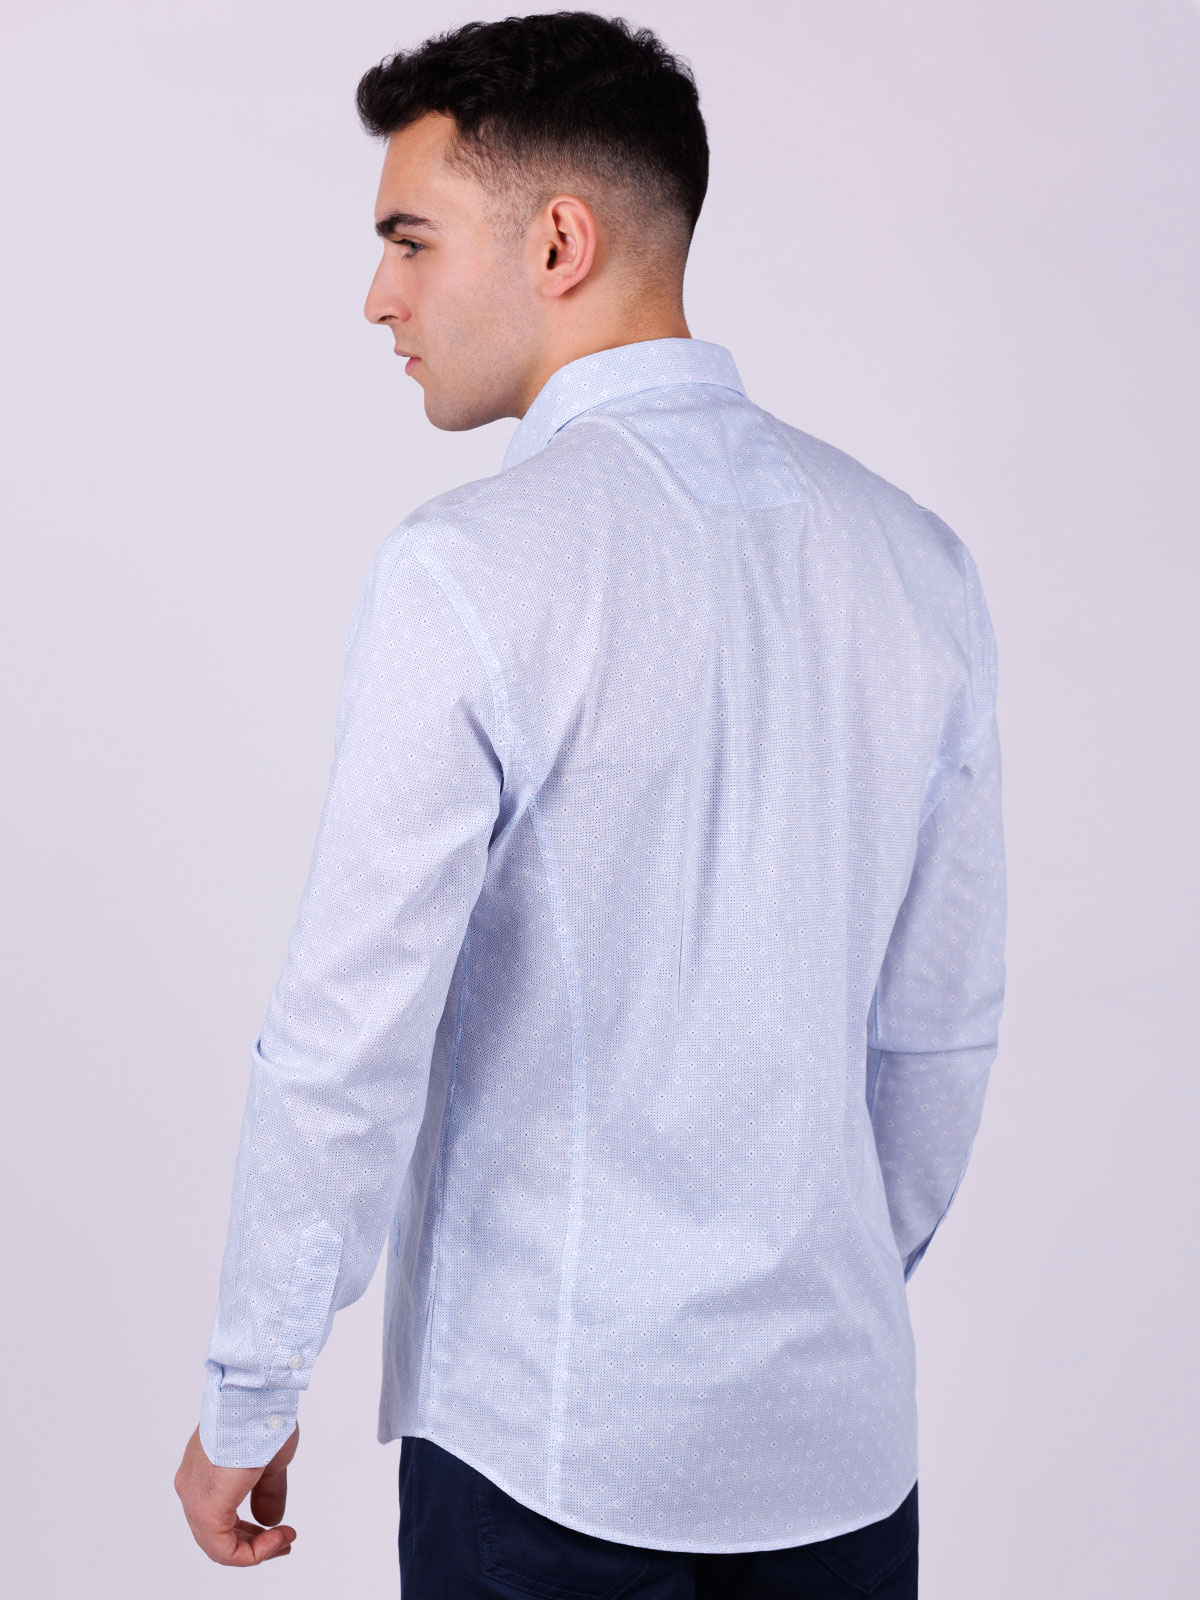 Cotton white shirt with printed dots - 21535 € 33.18 img4